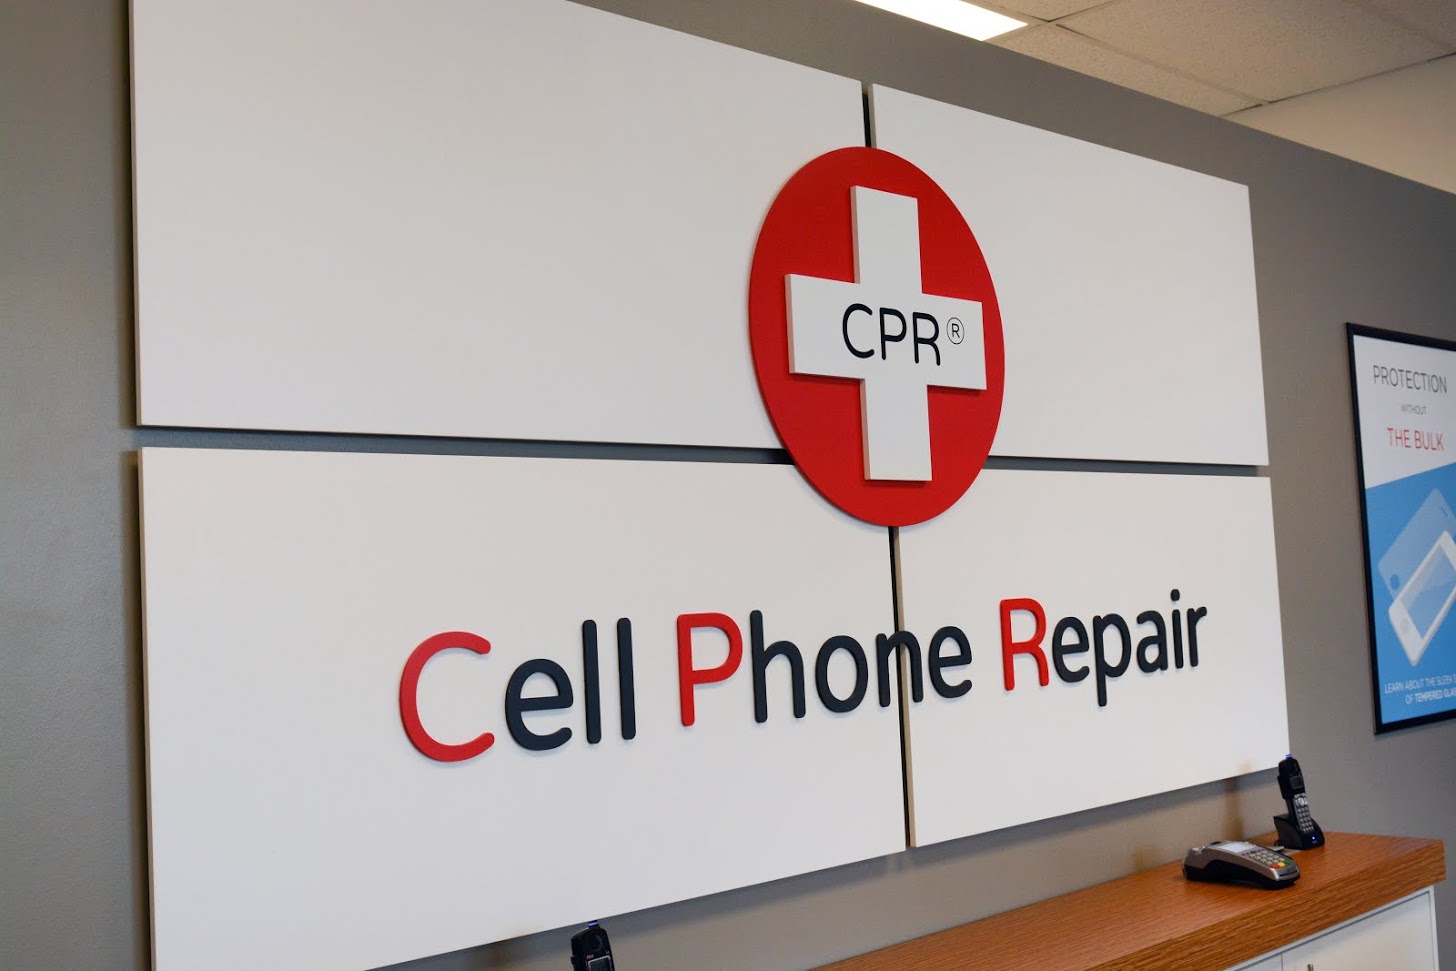 CPR Cell Phone Repair, Tuesday, June 18, 2019, Press release picture